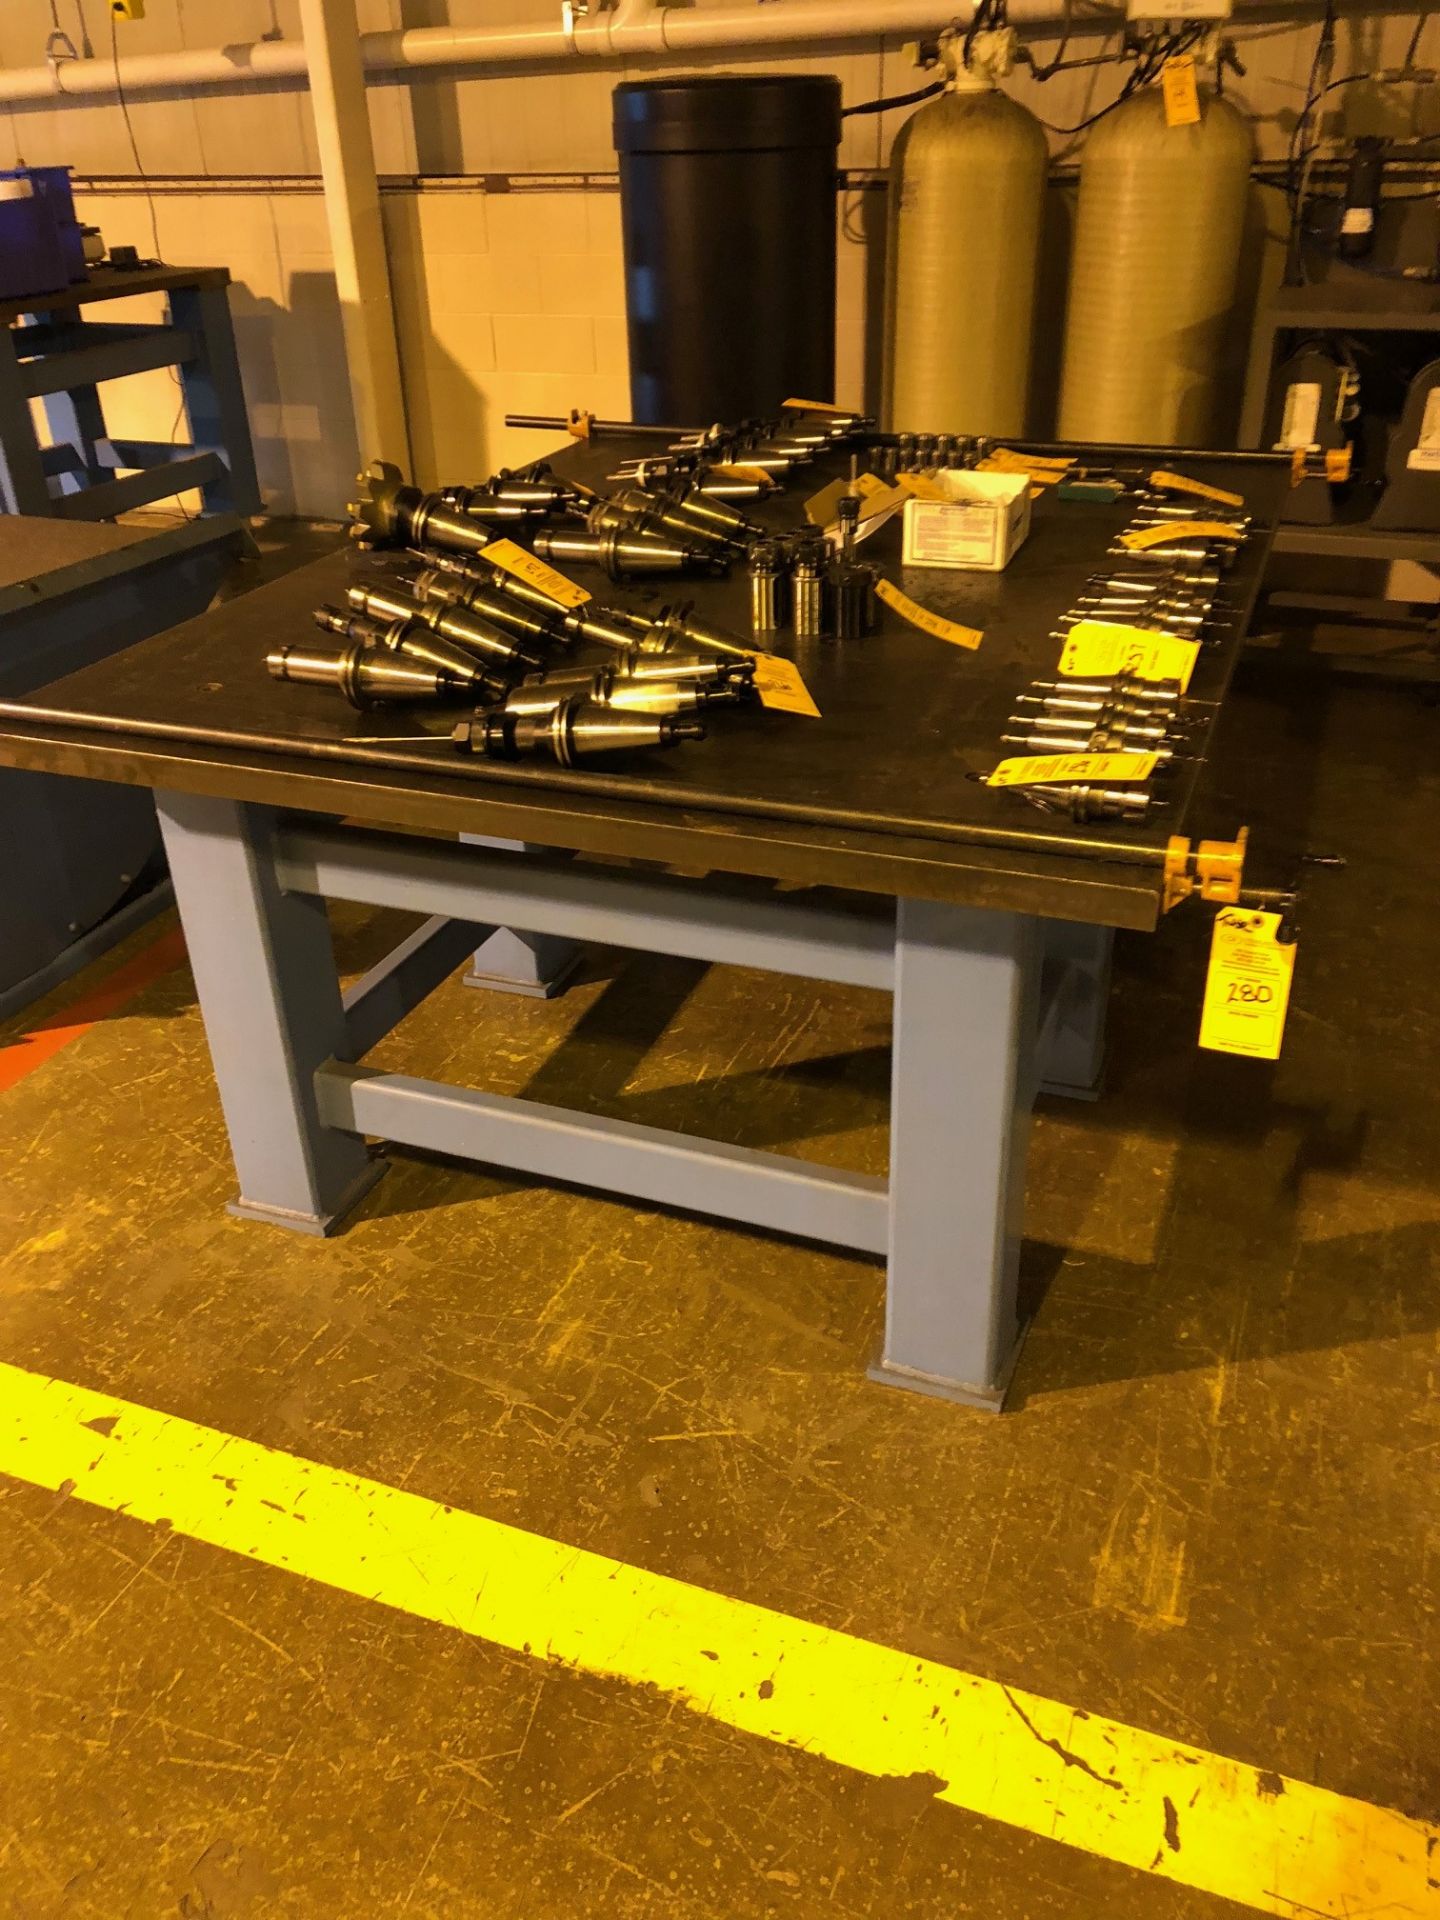 8'W X 6'D X 3'H STEEL WELDING TABLE (1" THICK STEEL TABLE TOP)